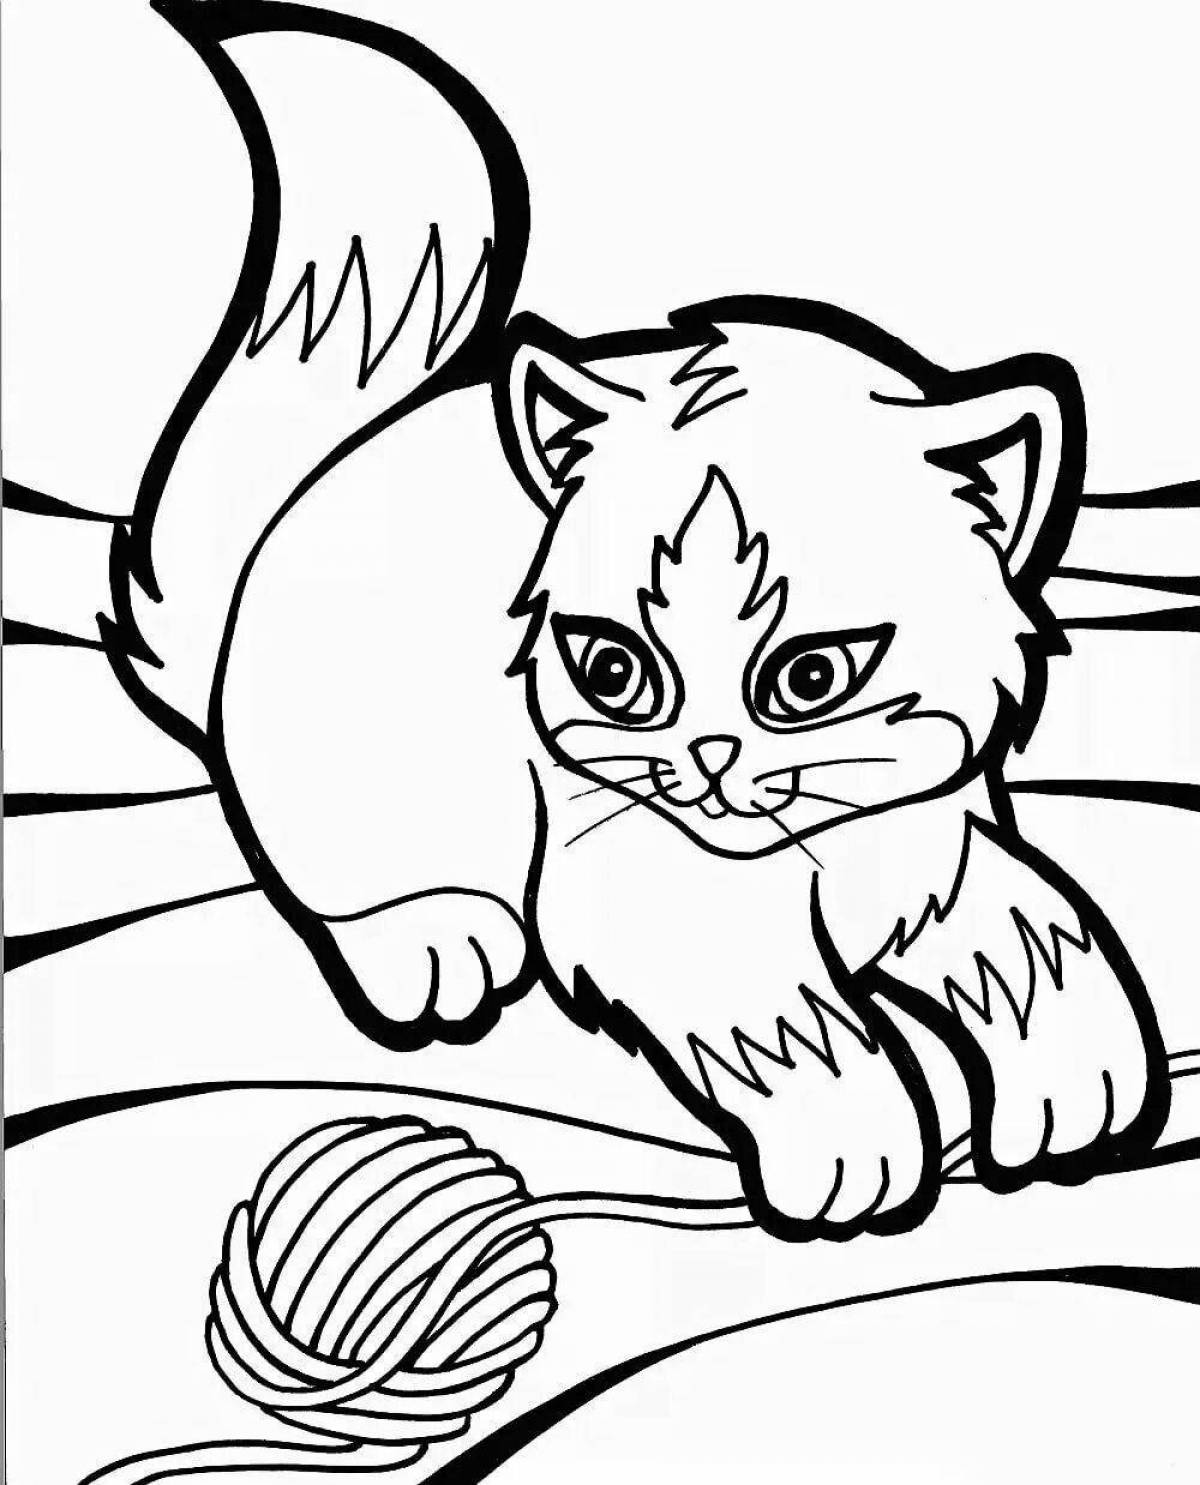 Coloring book radiant year of the cat